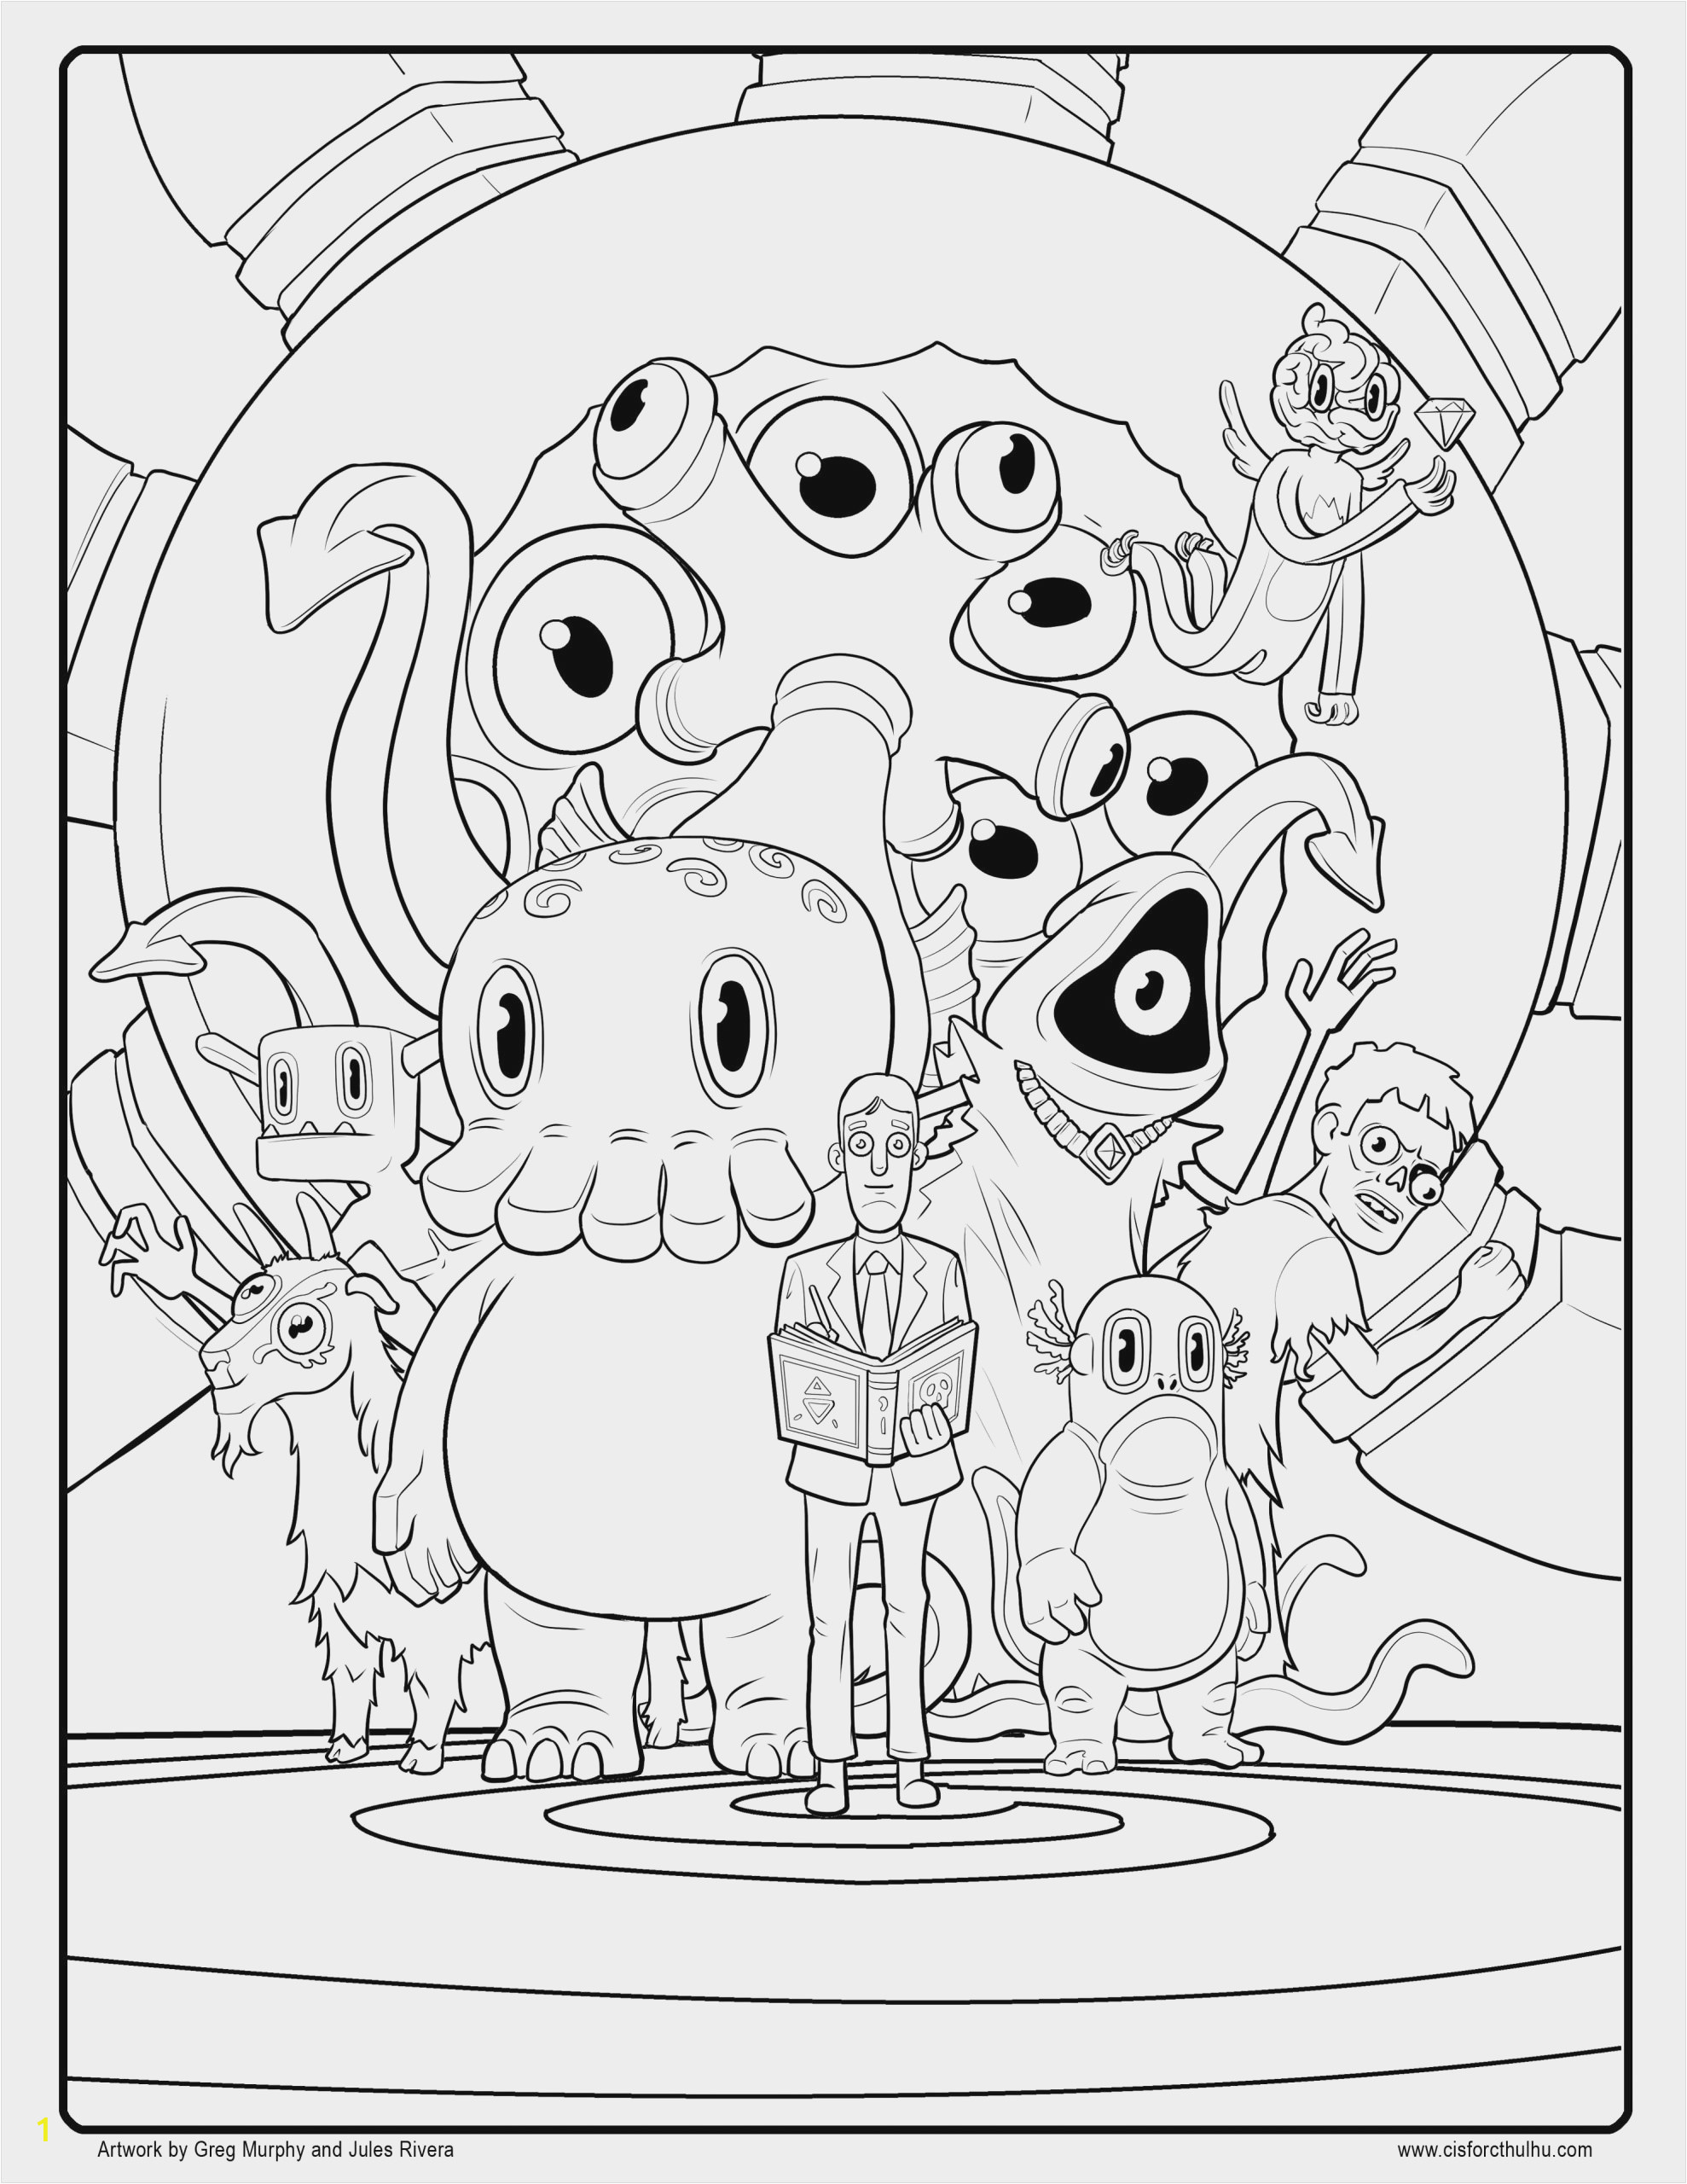 Easy Disney Coloring Pages Easy Disney Coloring Pages at Coloring Pages